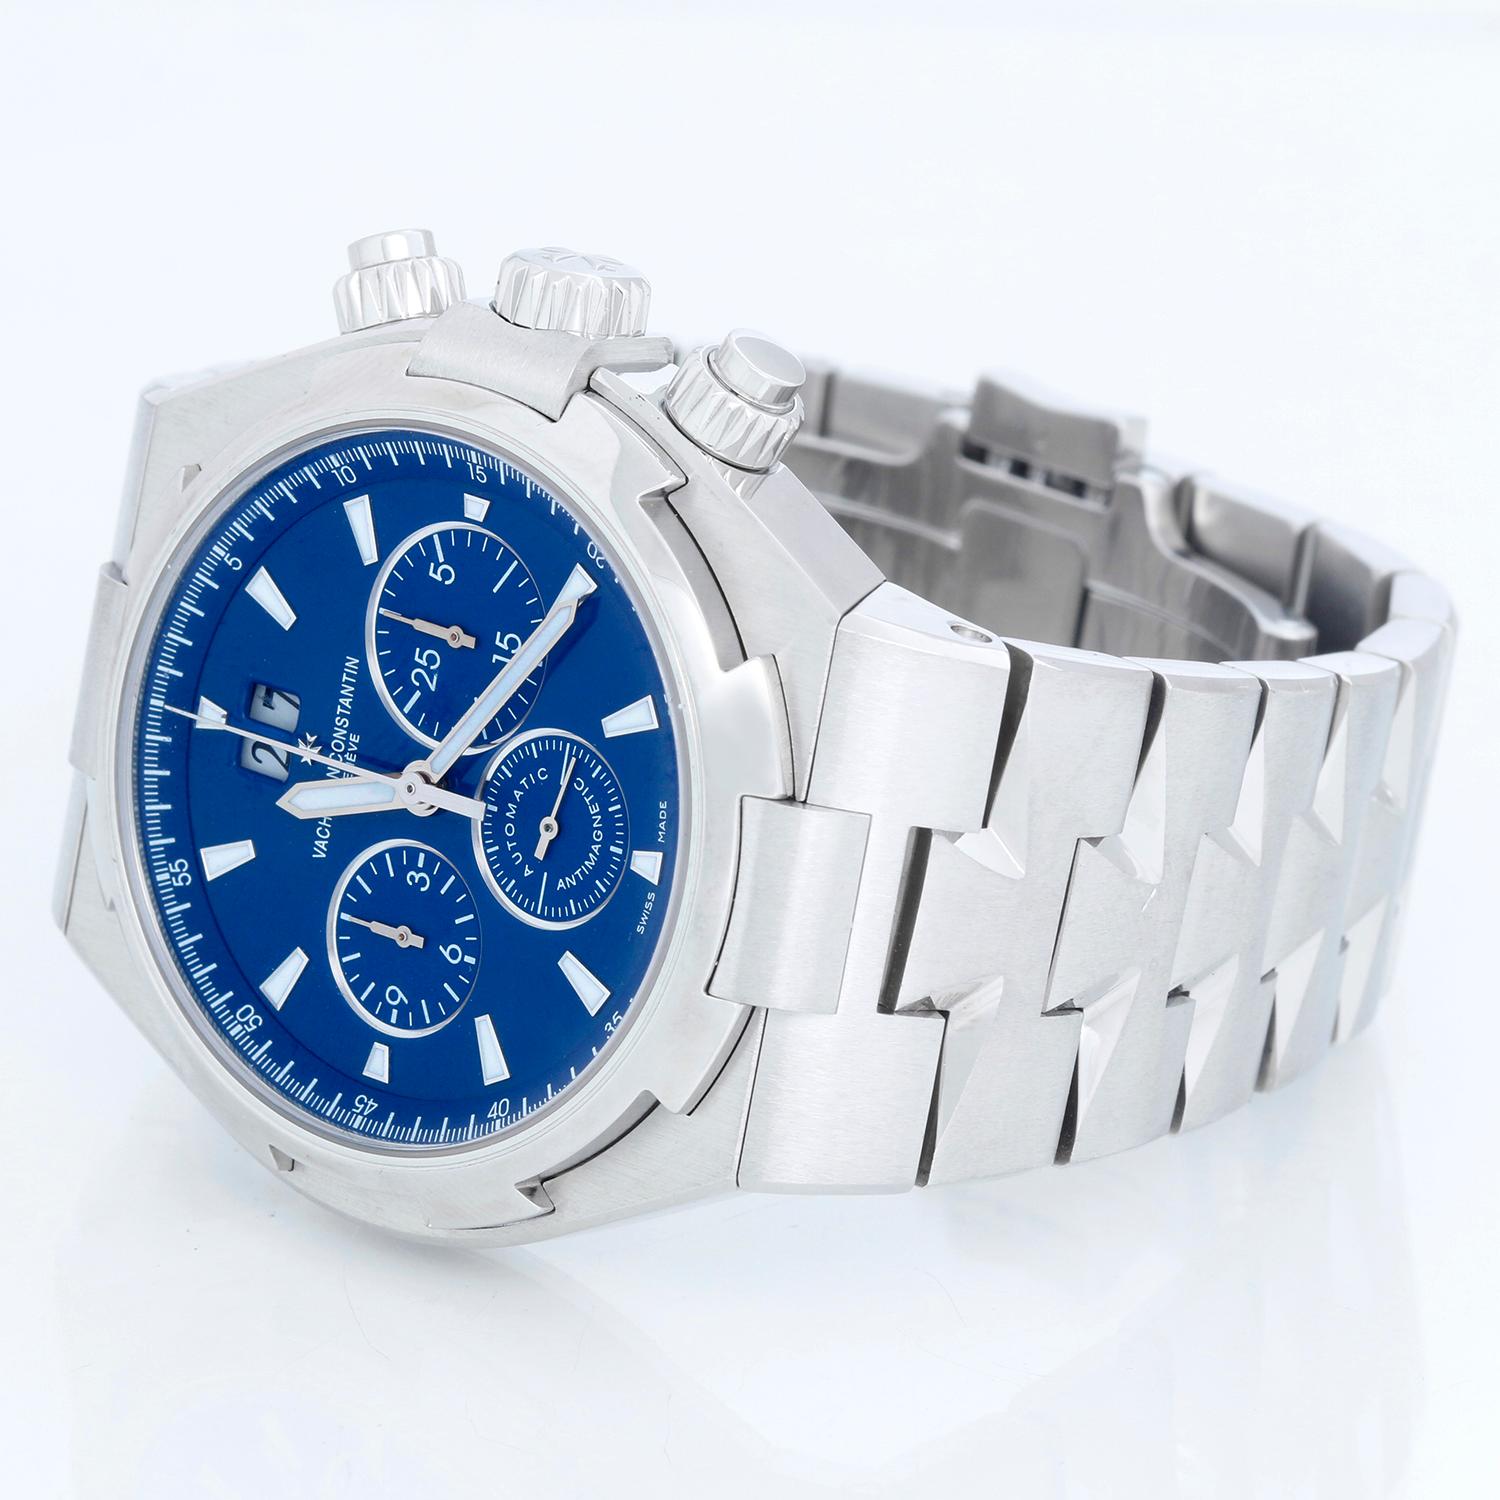 Vacheron Constantin Overseas Stainless Steel  Blue Dial Ref 49150 - Automatic winding; Chronograph. Brushed Stainless steel case ( 42 mm ). Blue dial with subdials featuring hour, minute and seconds recorders. Stainless steel Vacheron Constantin